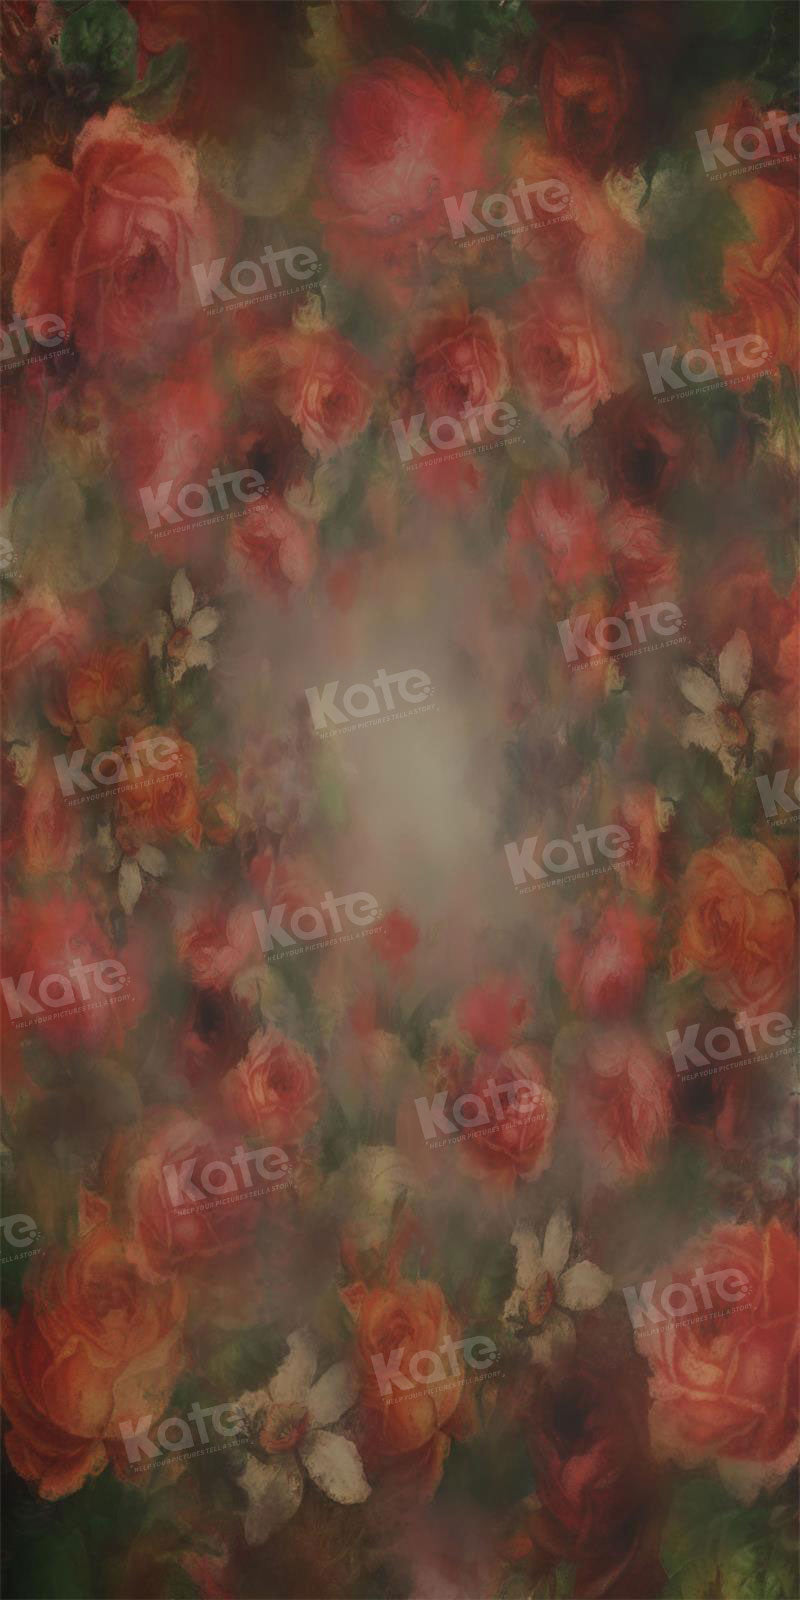 Kate Abstract Floral Fine Art Backdrop for Photography